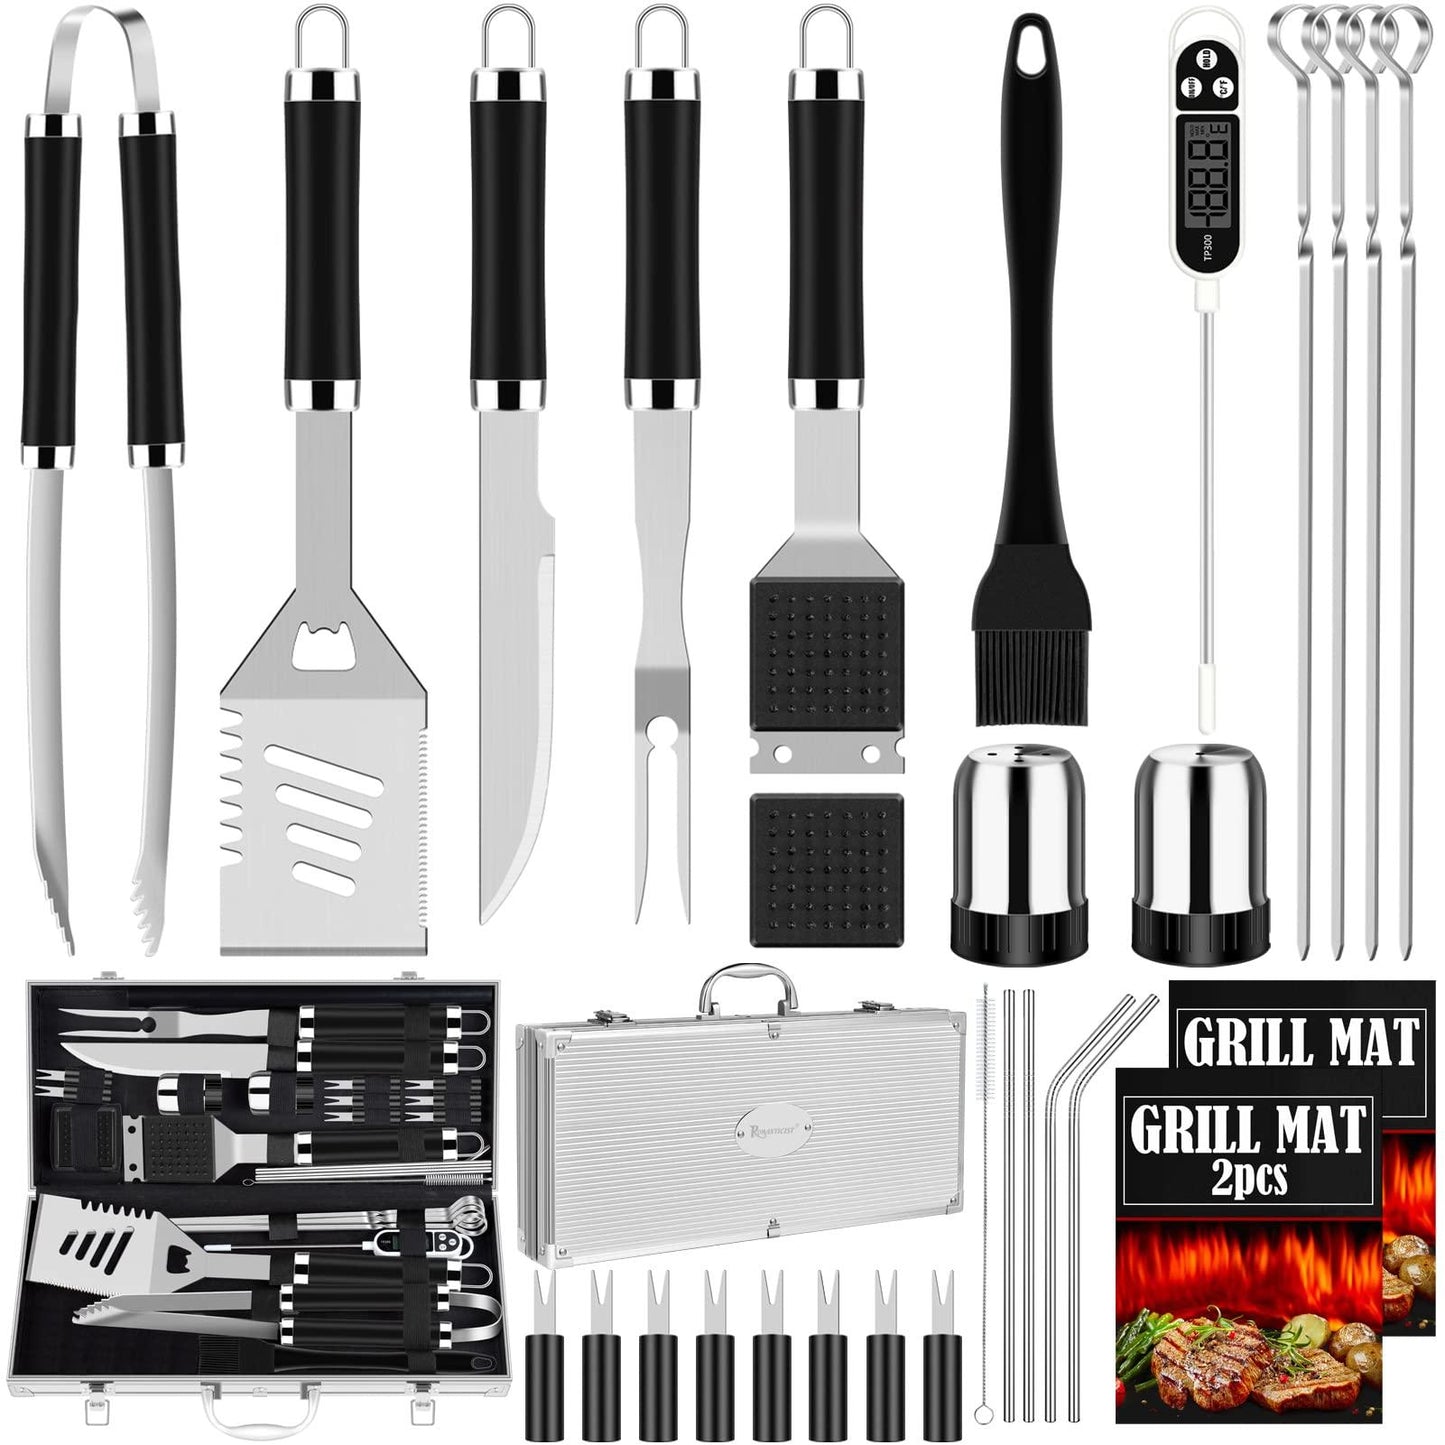 ROMANTICIST 30pcs BBQ Grill Tool Set for Men Dad, Heavy Duty Stainless Steel Grill Utensils Set, Non-Slip Grilling Accessories Kit with Thermometer, Mats in Aluminum Case for Travel, Outdoor Black - CookCave